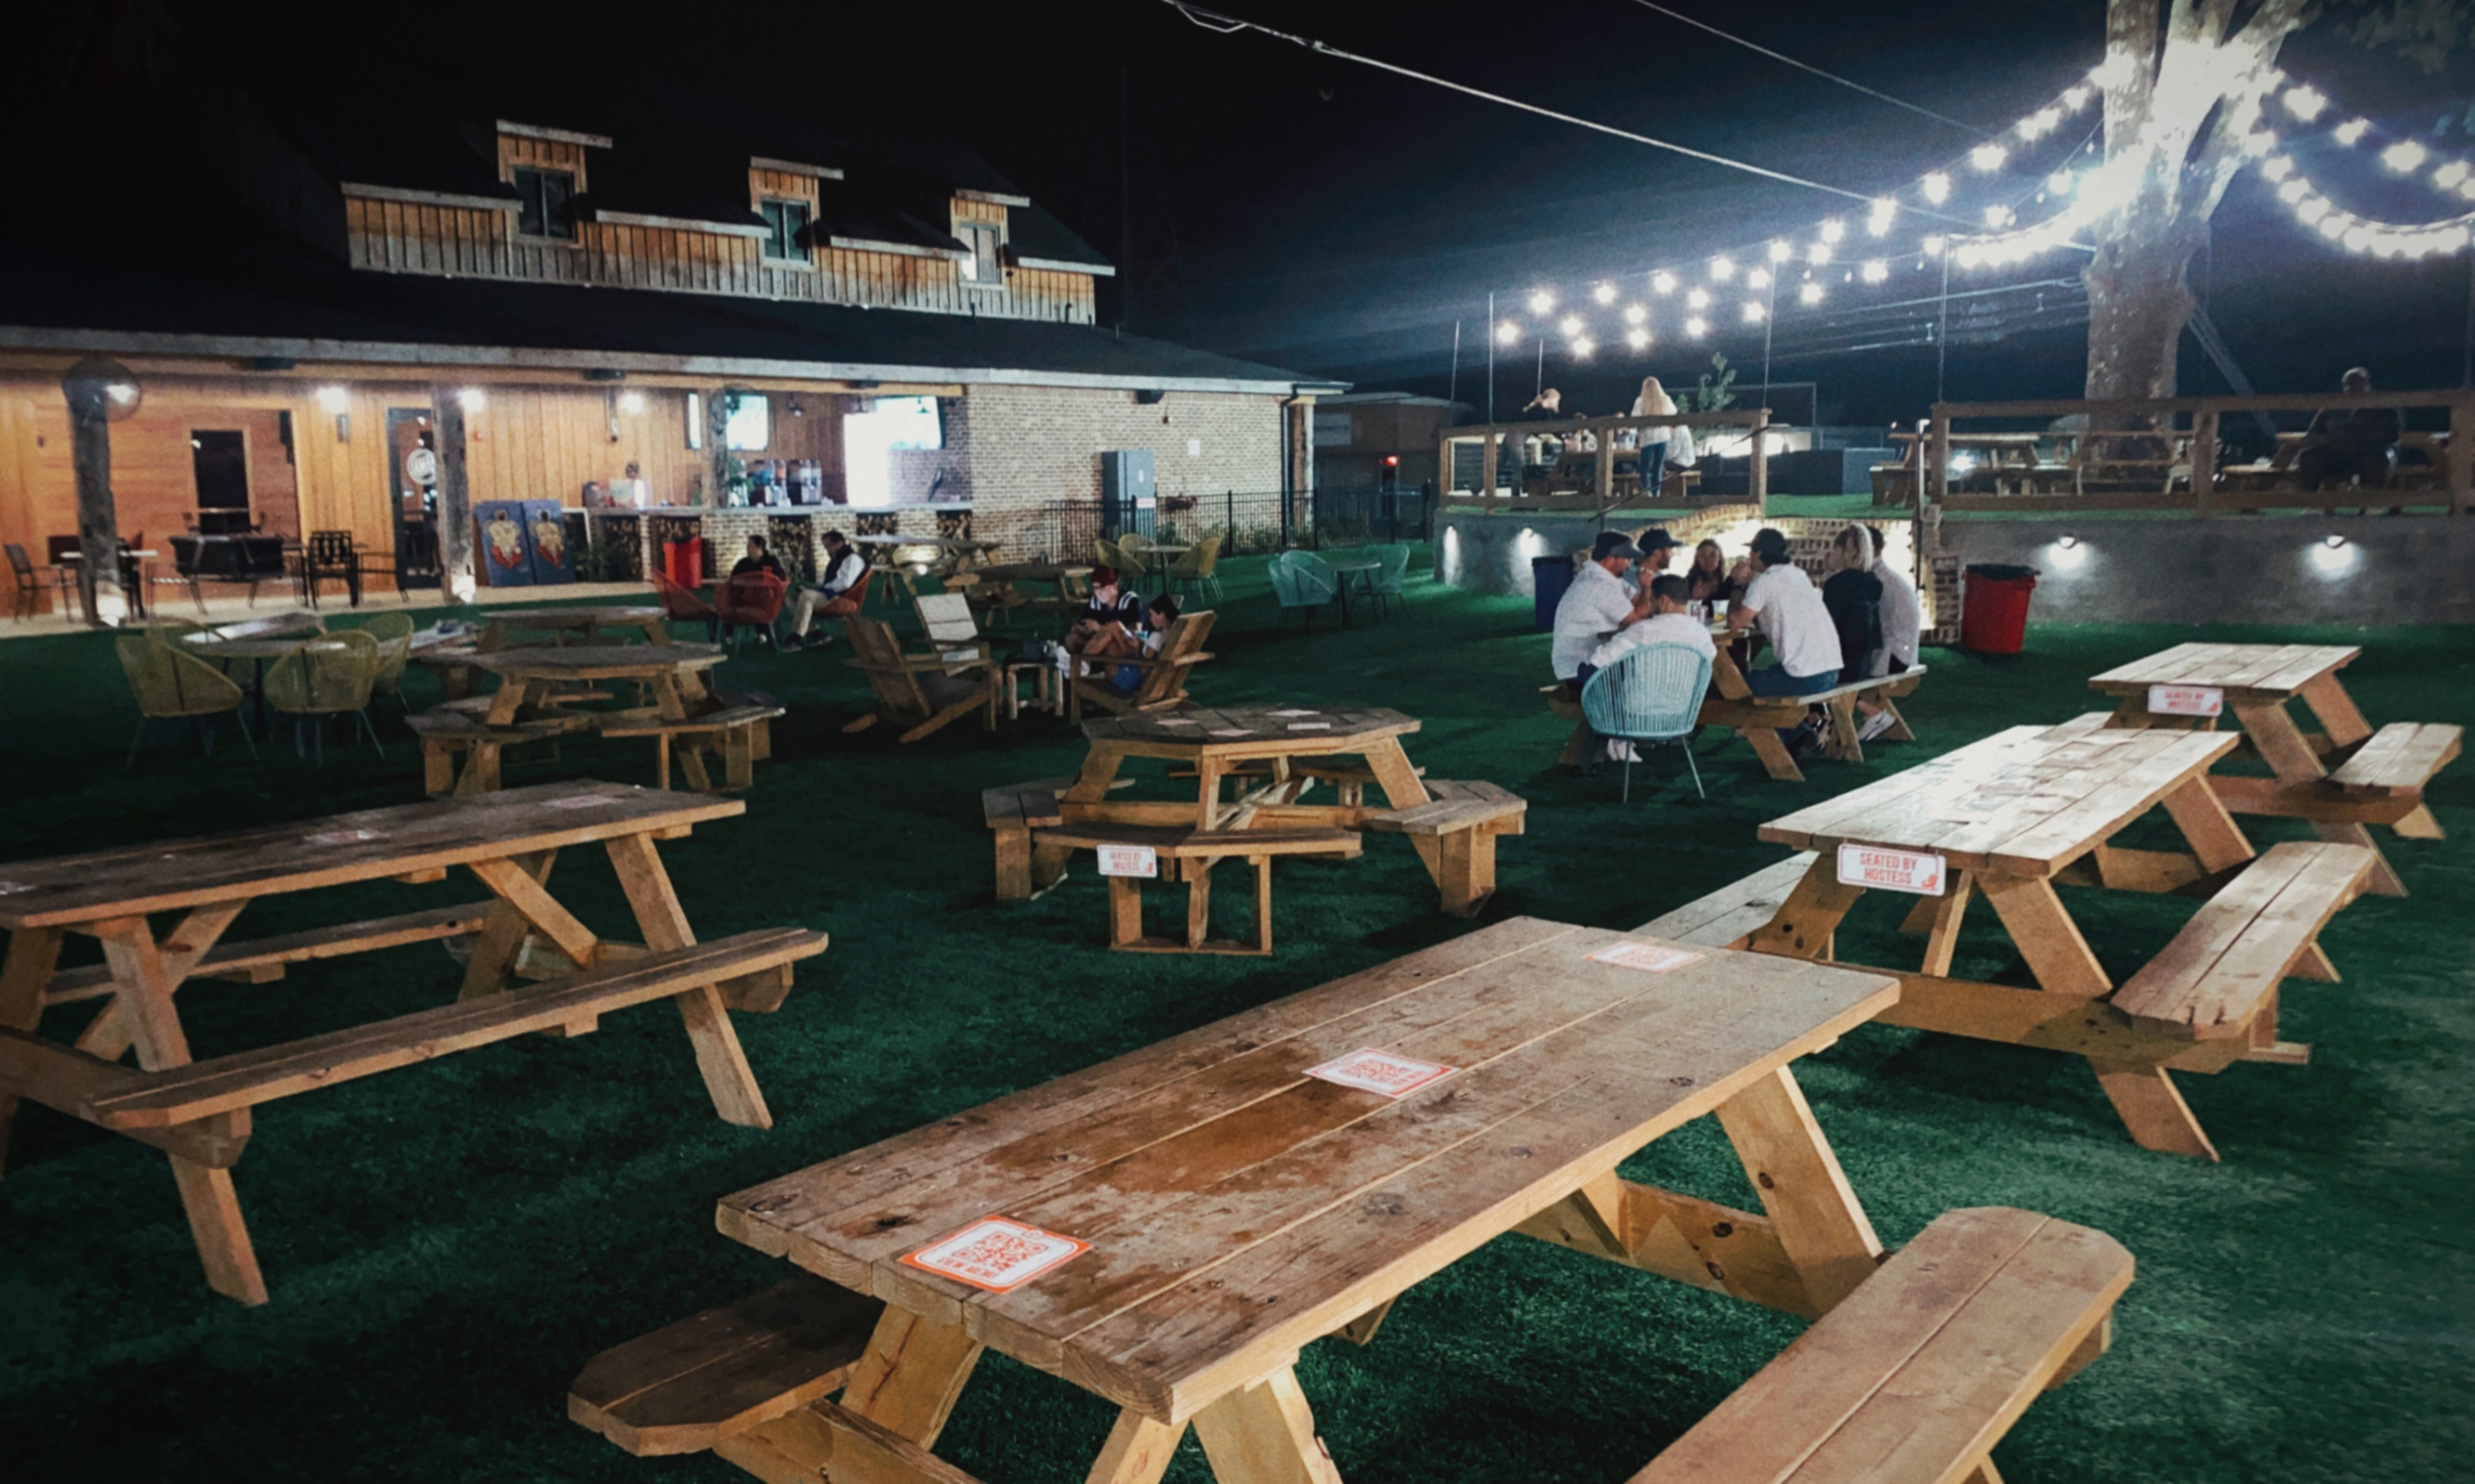 Great Barbecue and a Fun Atmosphere at Oxford’s Lamar Yard